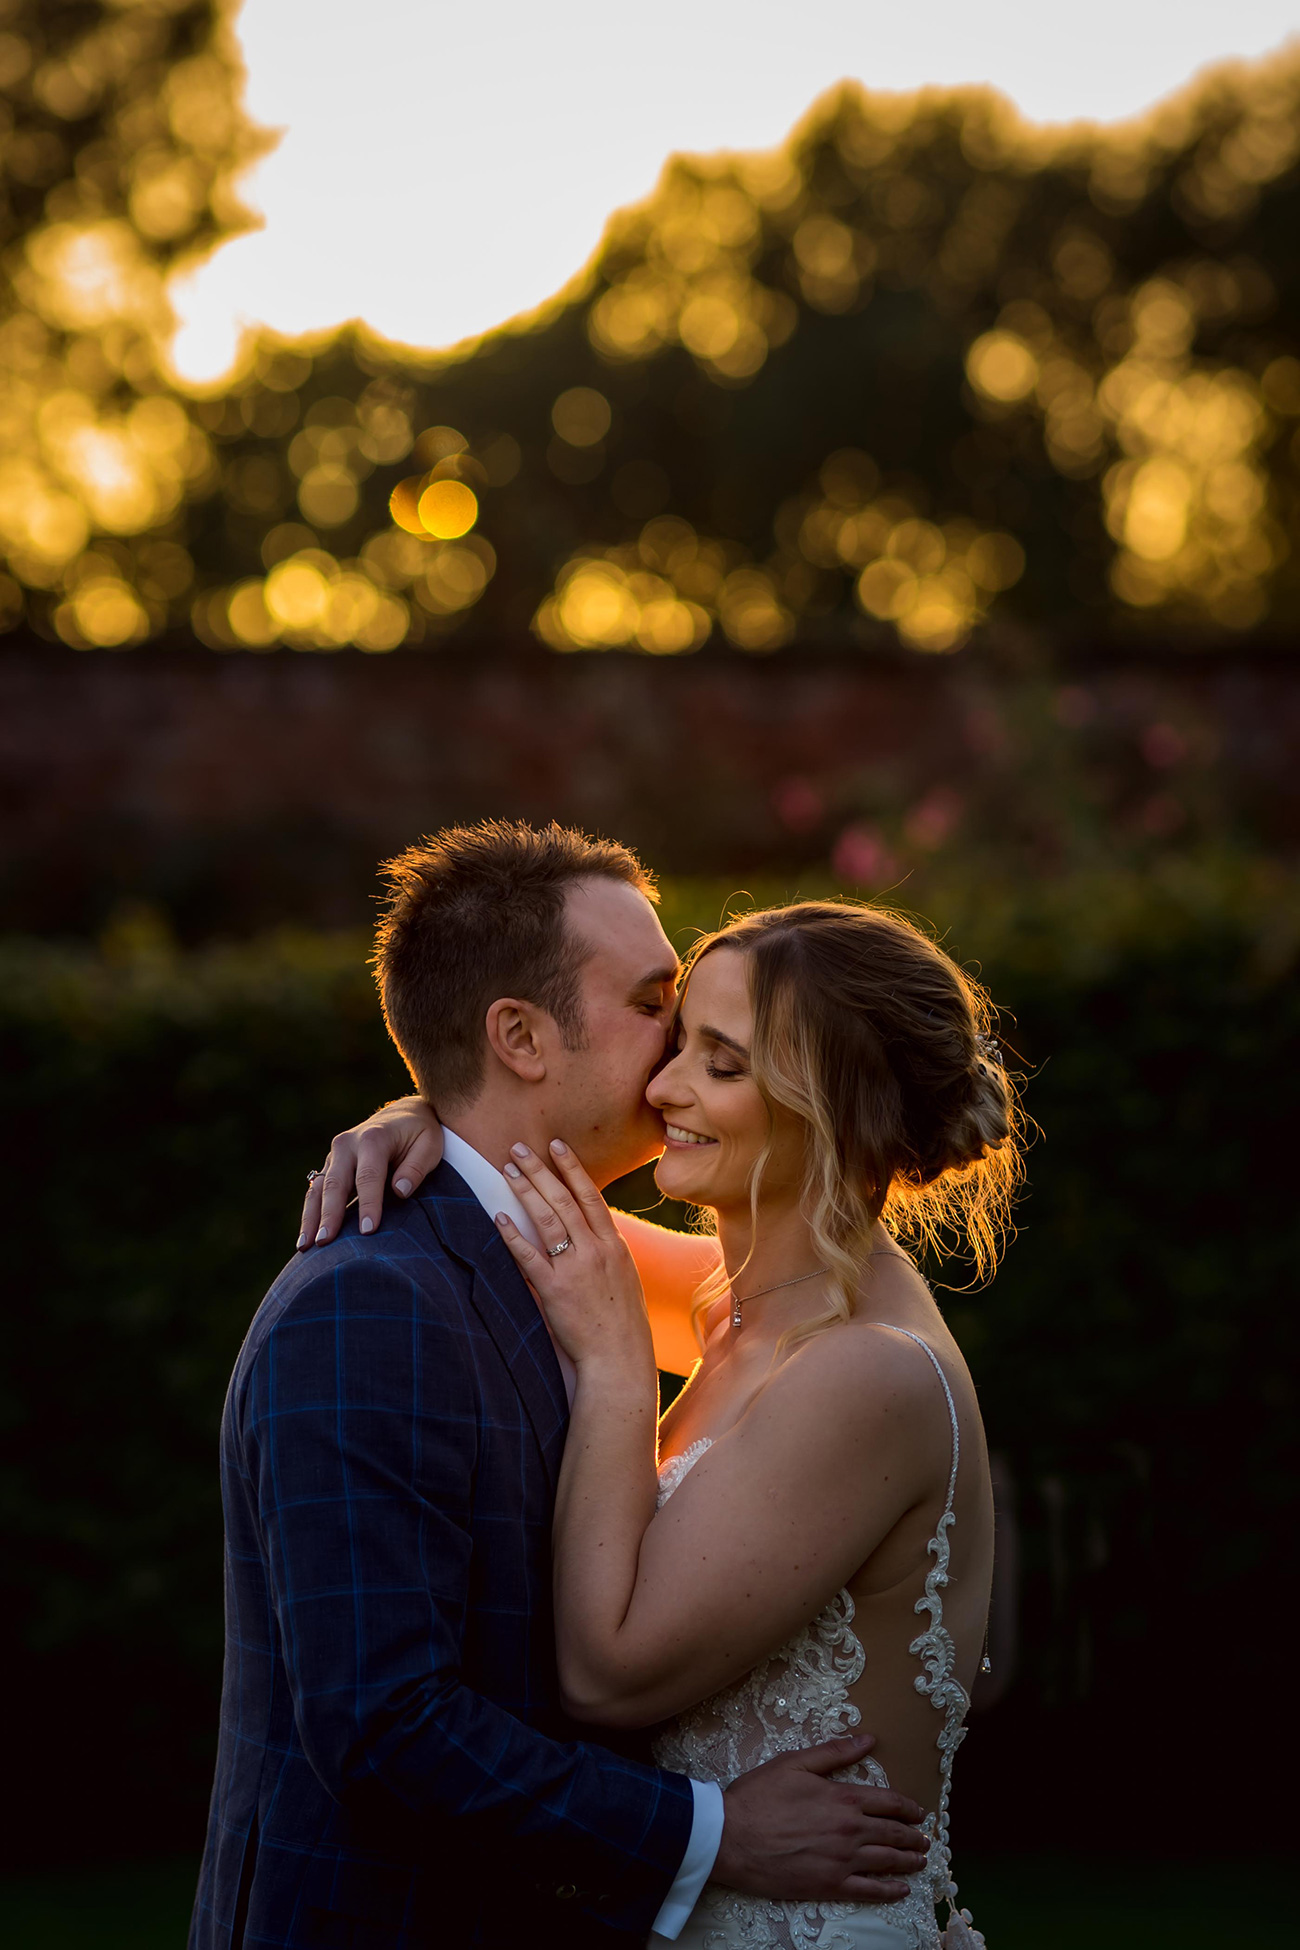 amie and lees festival wedding at the walled garden at beeston fields